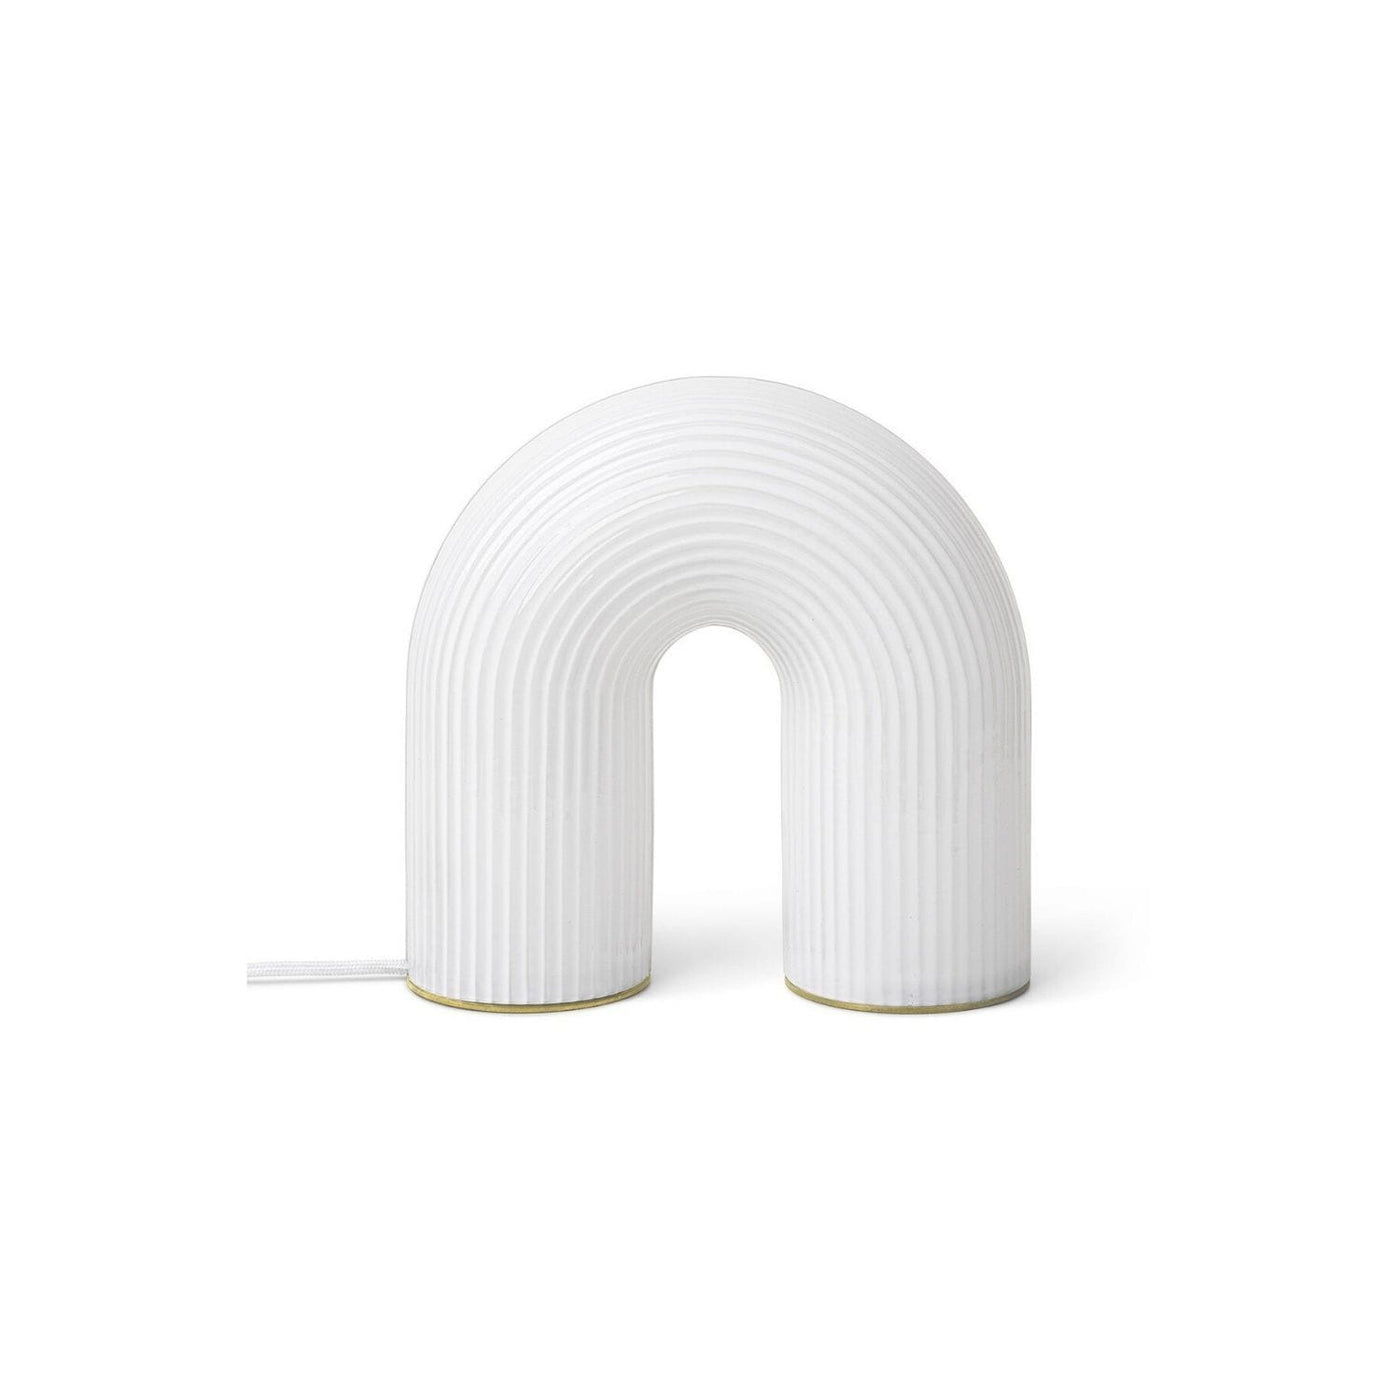 Ferm Living Vuelta table lamp, available from someday designs